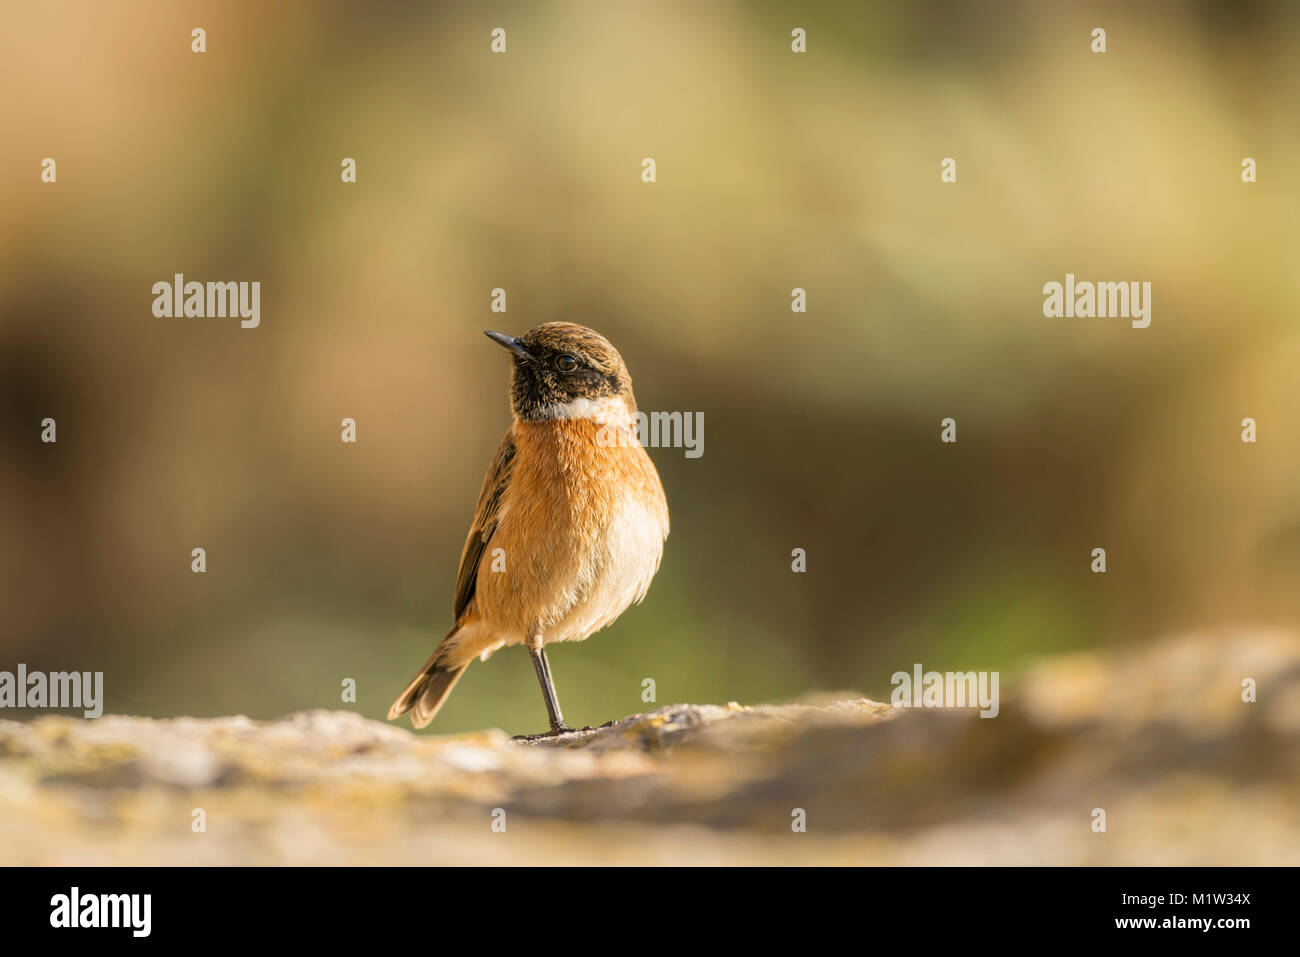 Stonechat,  Saxicola rubicola,   searching for food on an old dry stone wall,late winter in Somerset, pale diffuse background Stock Photo